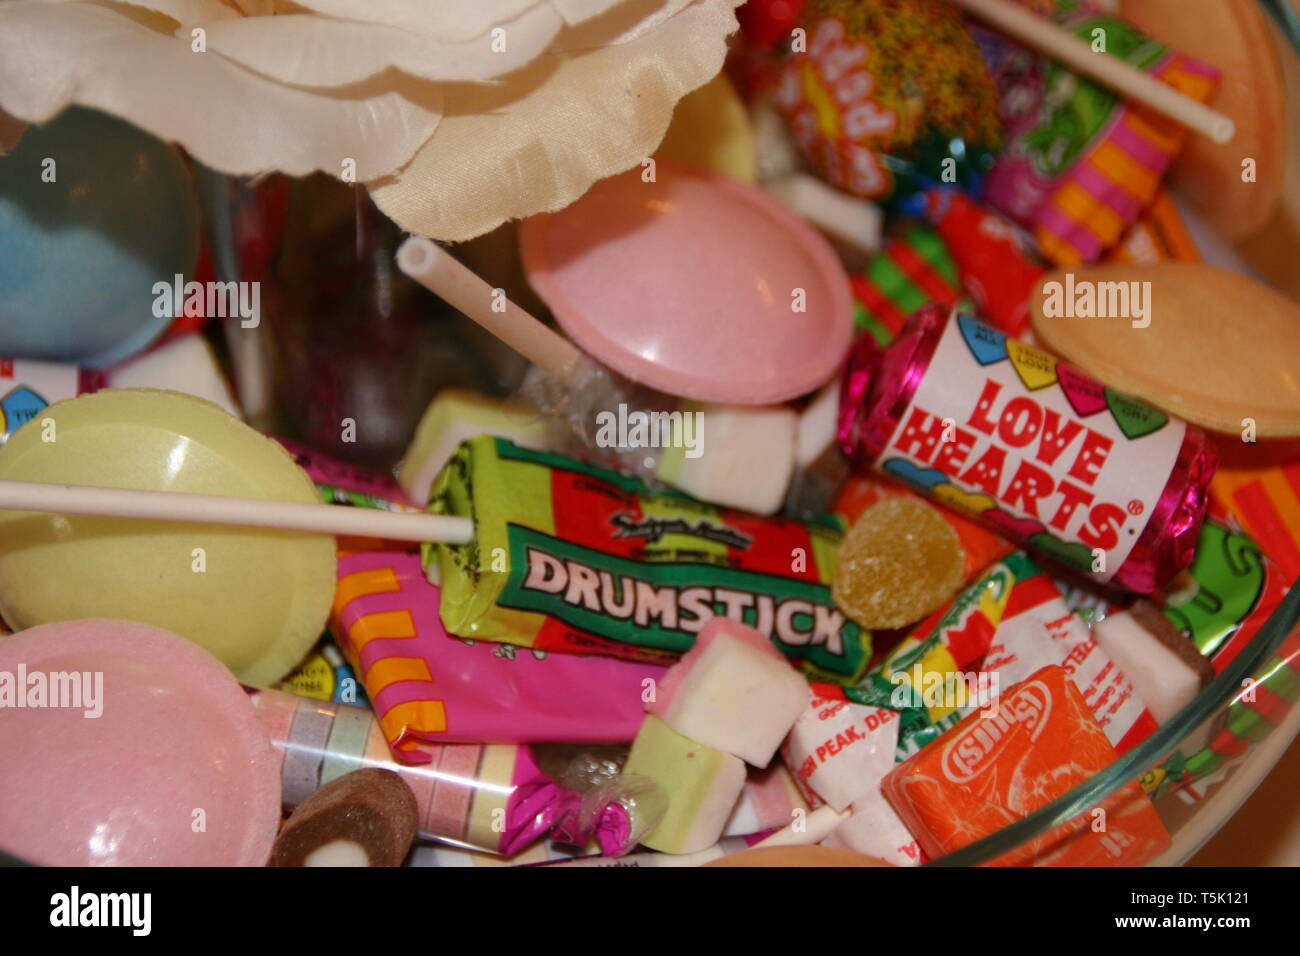 Retro sweets in a bowl, selection of love hearts, drumstick lolly and flying saucers in a glass bowl at a wedding reception Stock Photo